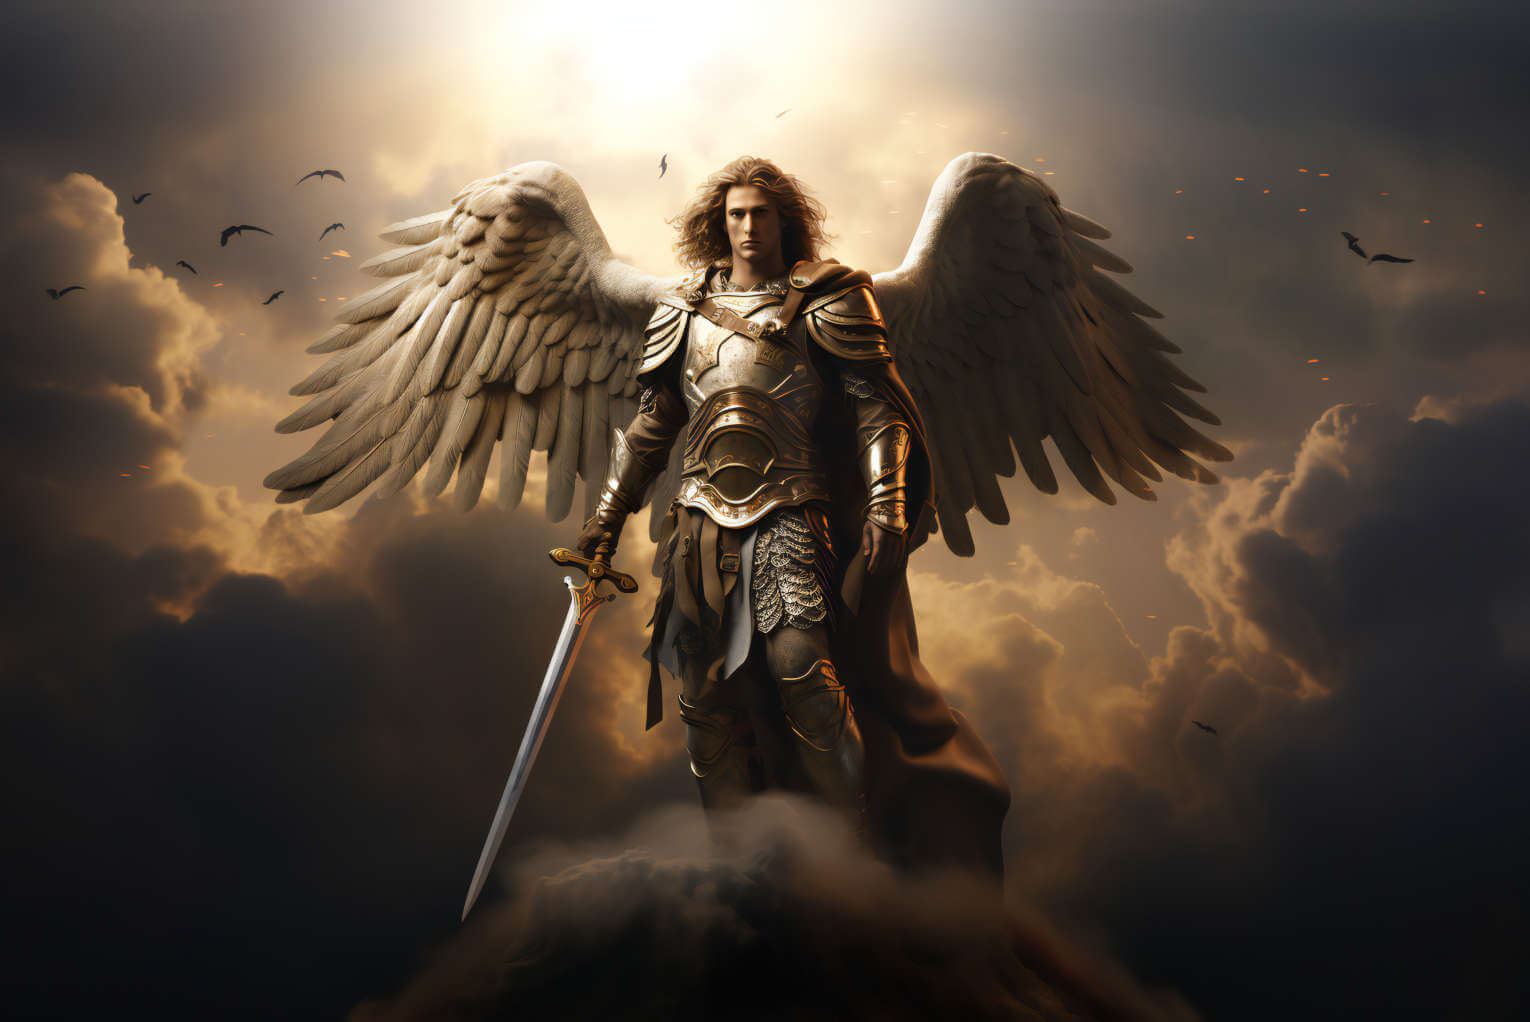 The Prince of Persia vs. the Archangel Michael